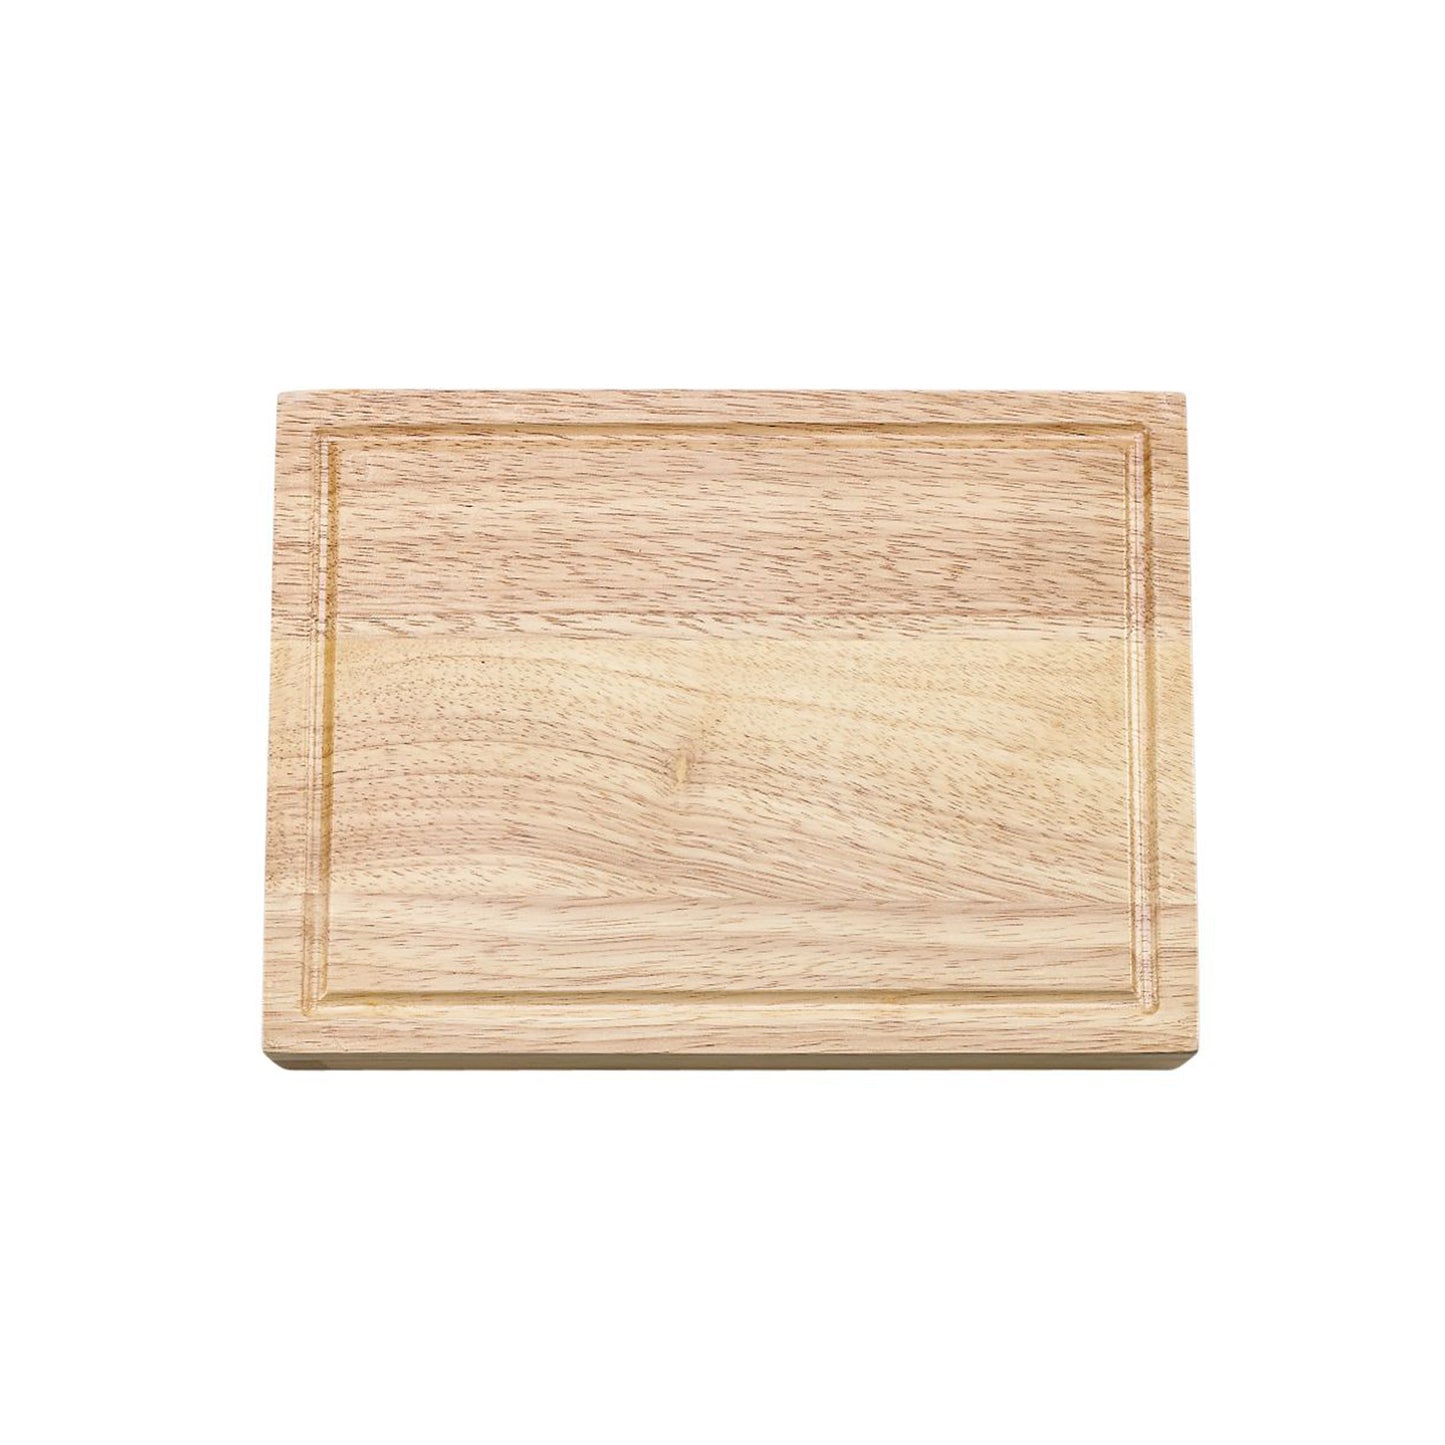 Rectangular Cheeseboard with Concealed Tools